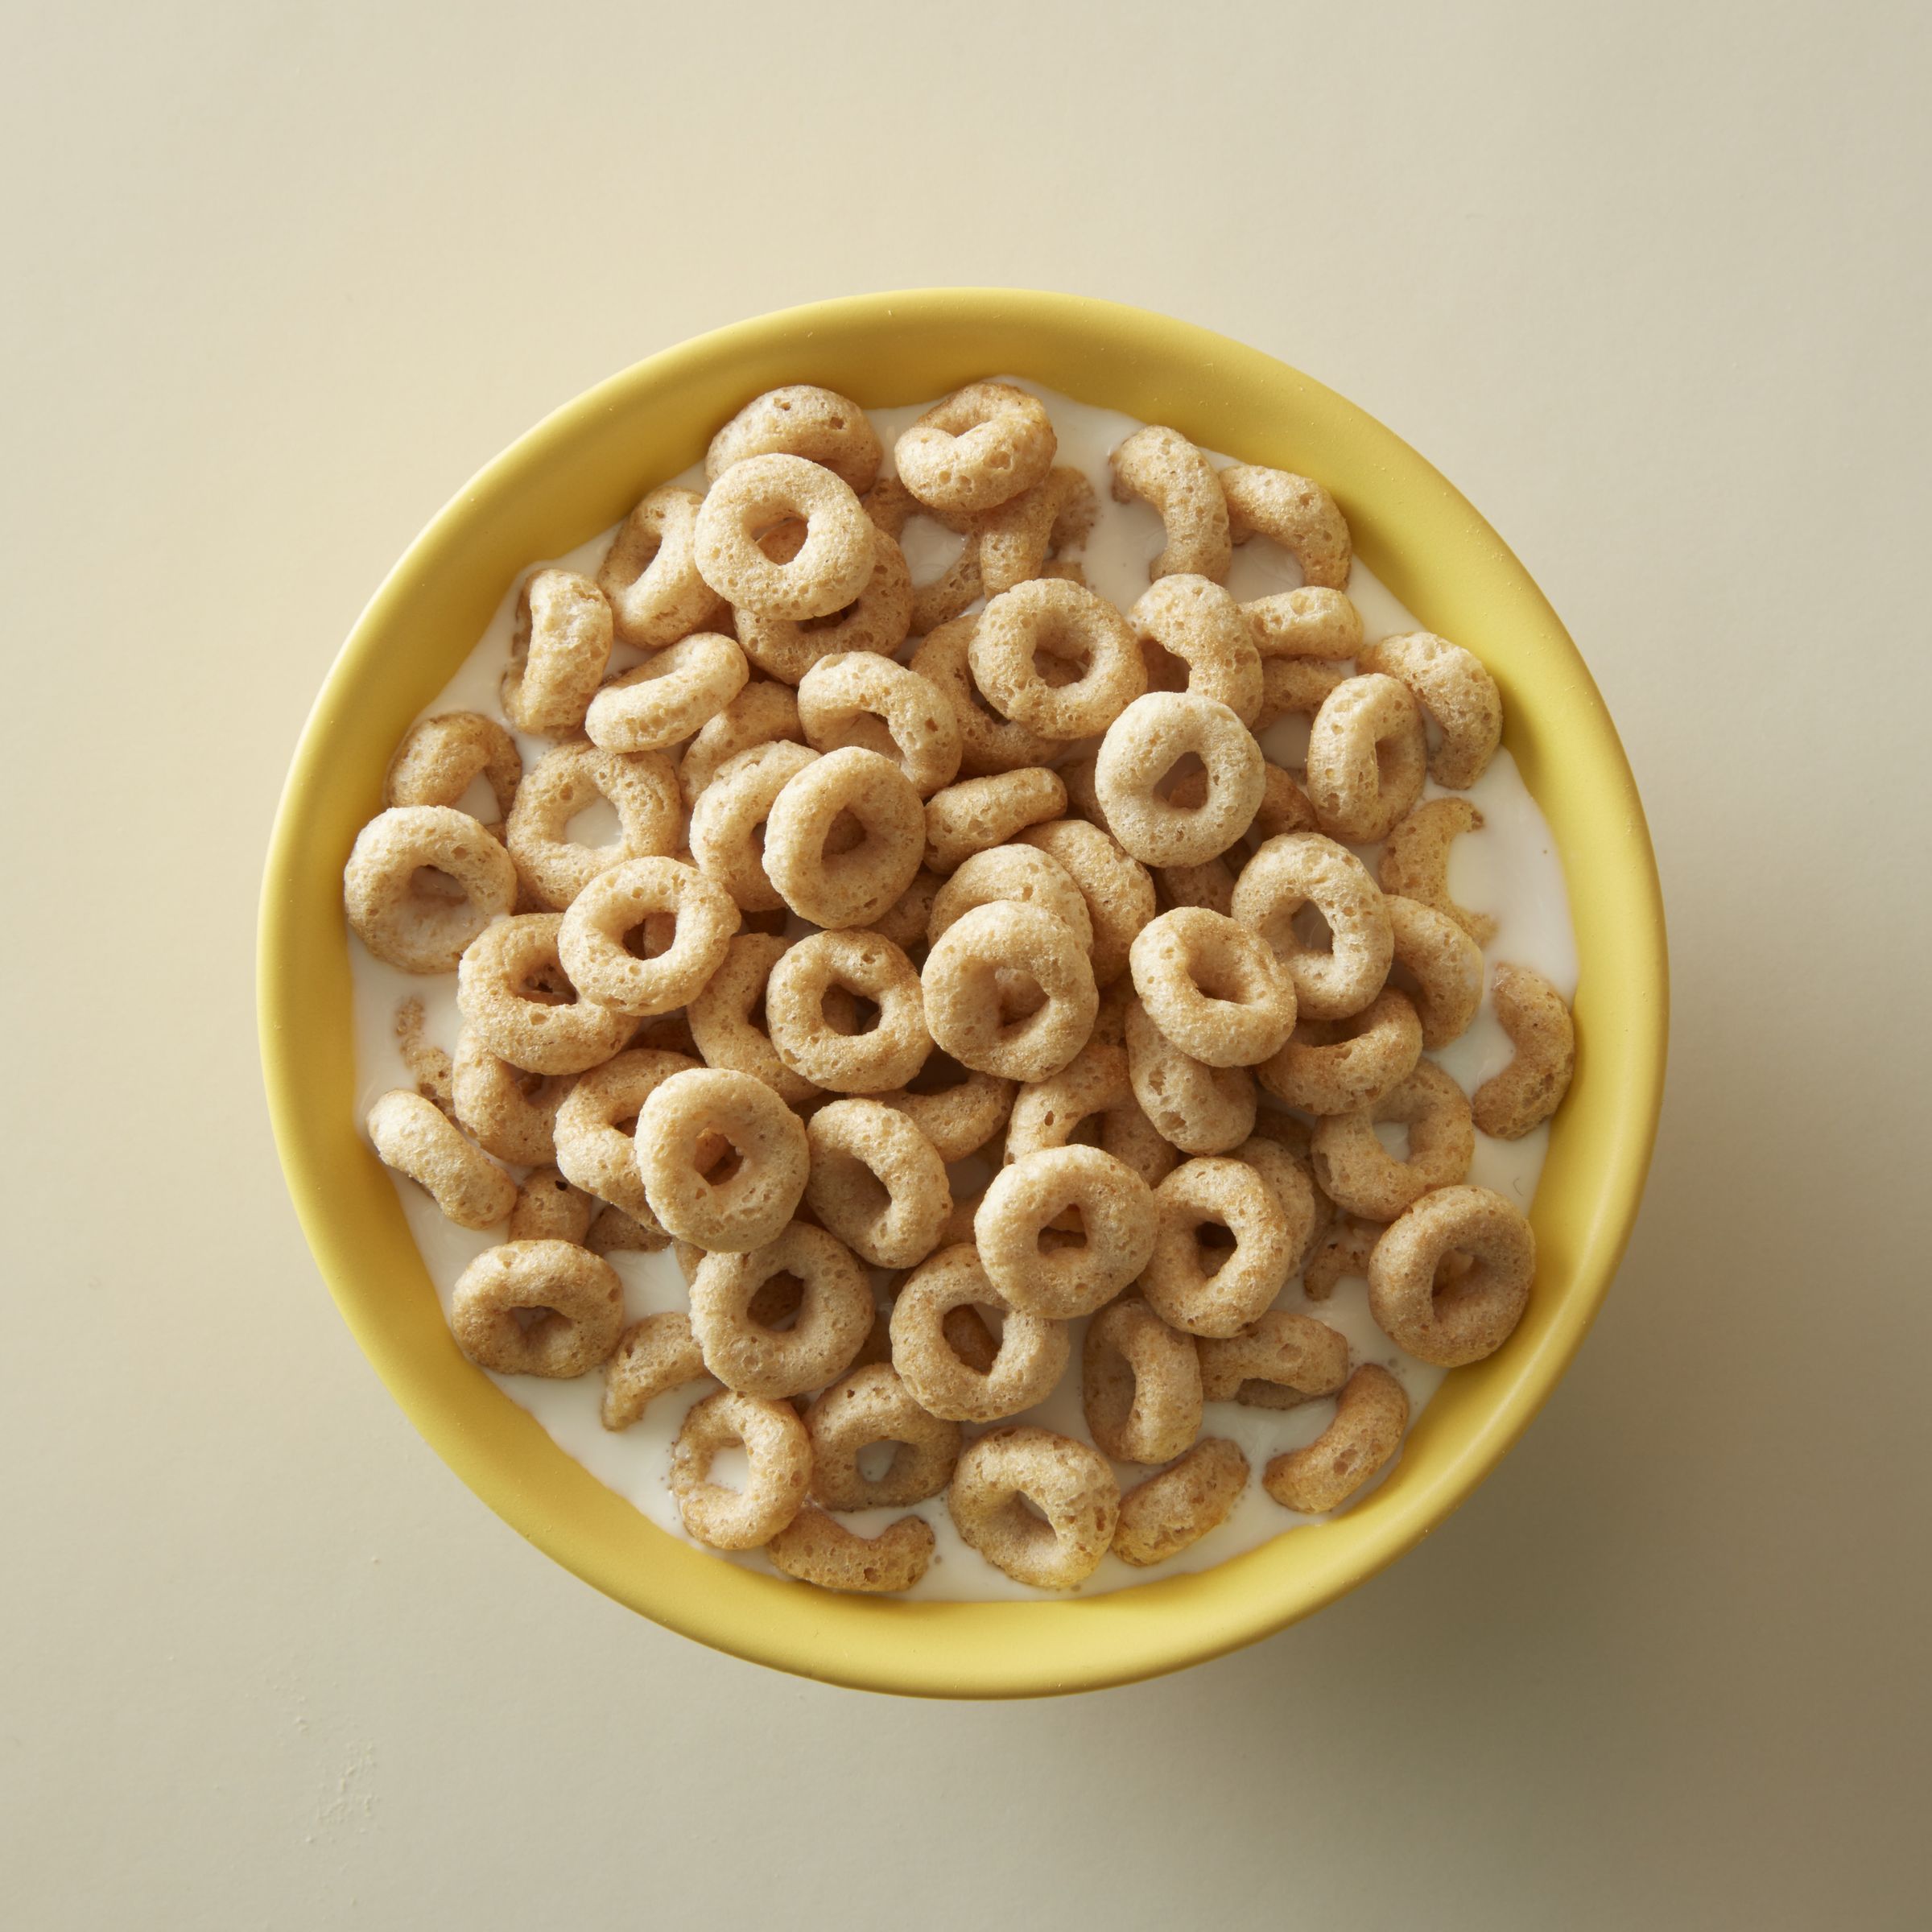 General Mills Honey Nut Cheerios Large Size Cereal, 15.4 oz